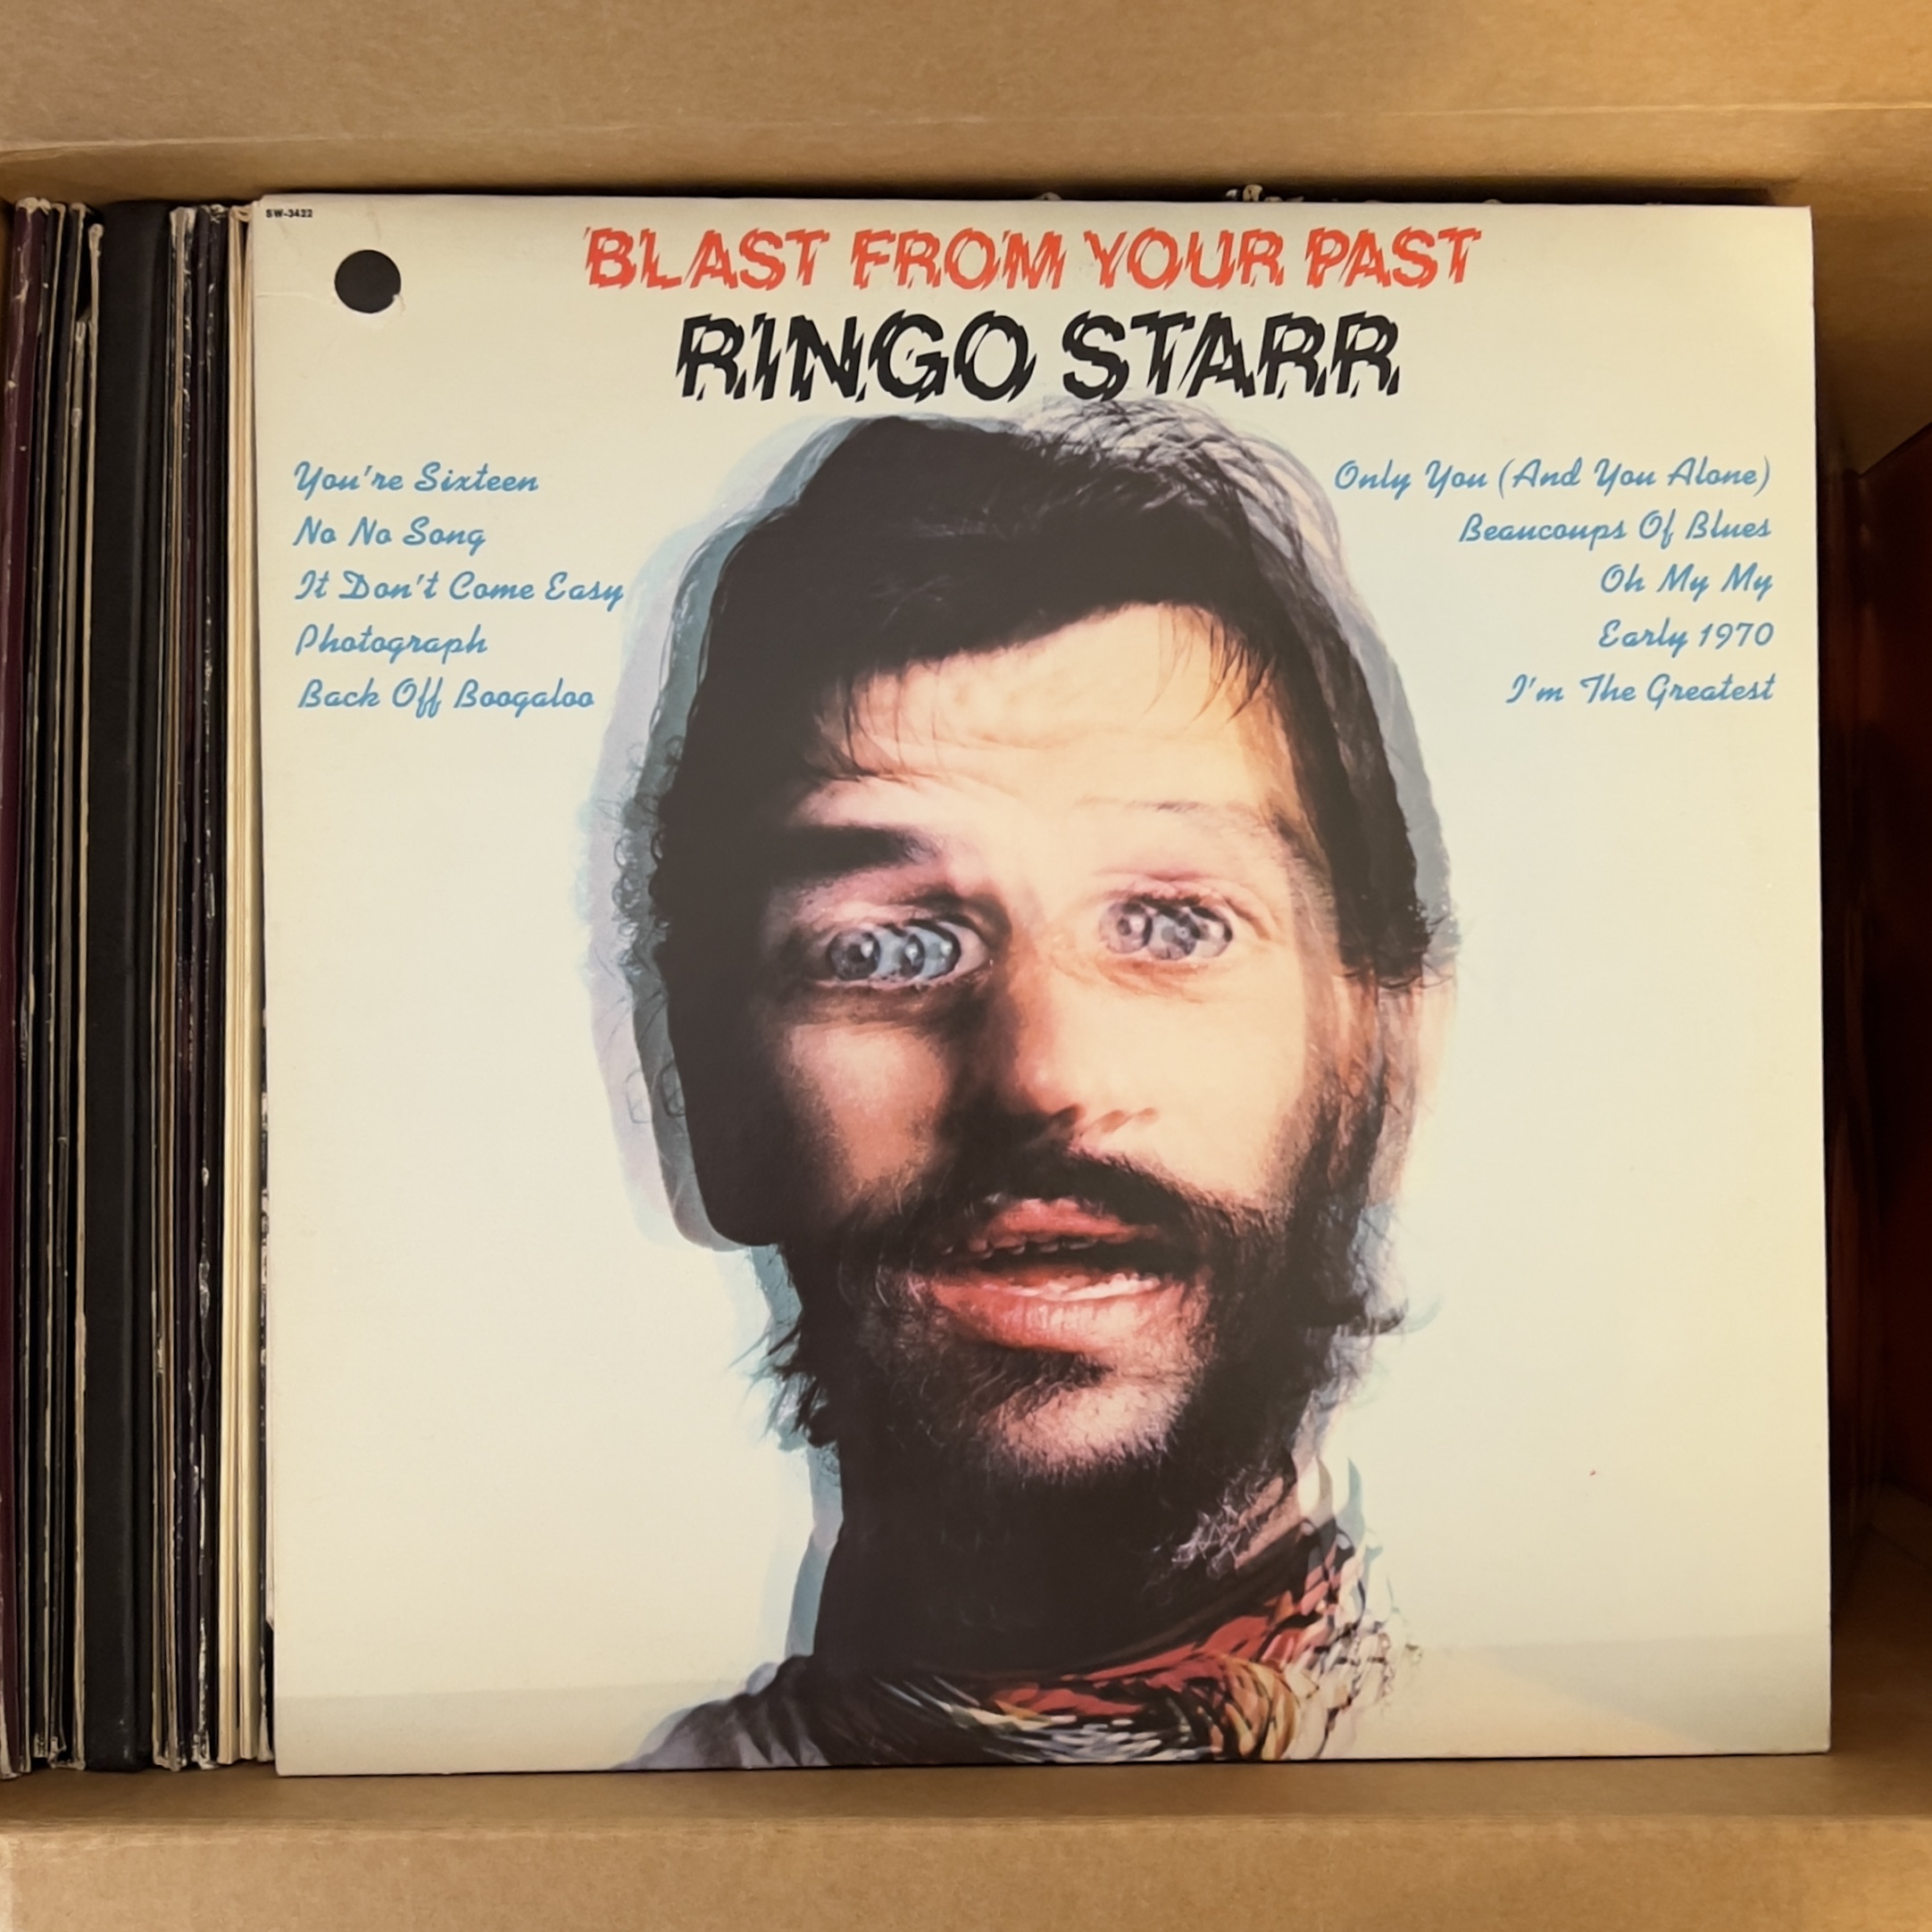 Blast From Your Past by Ringo Starr